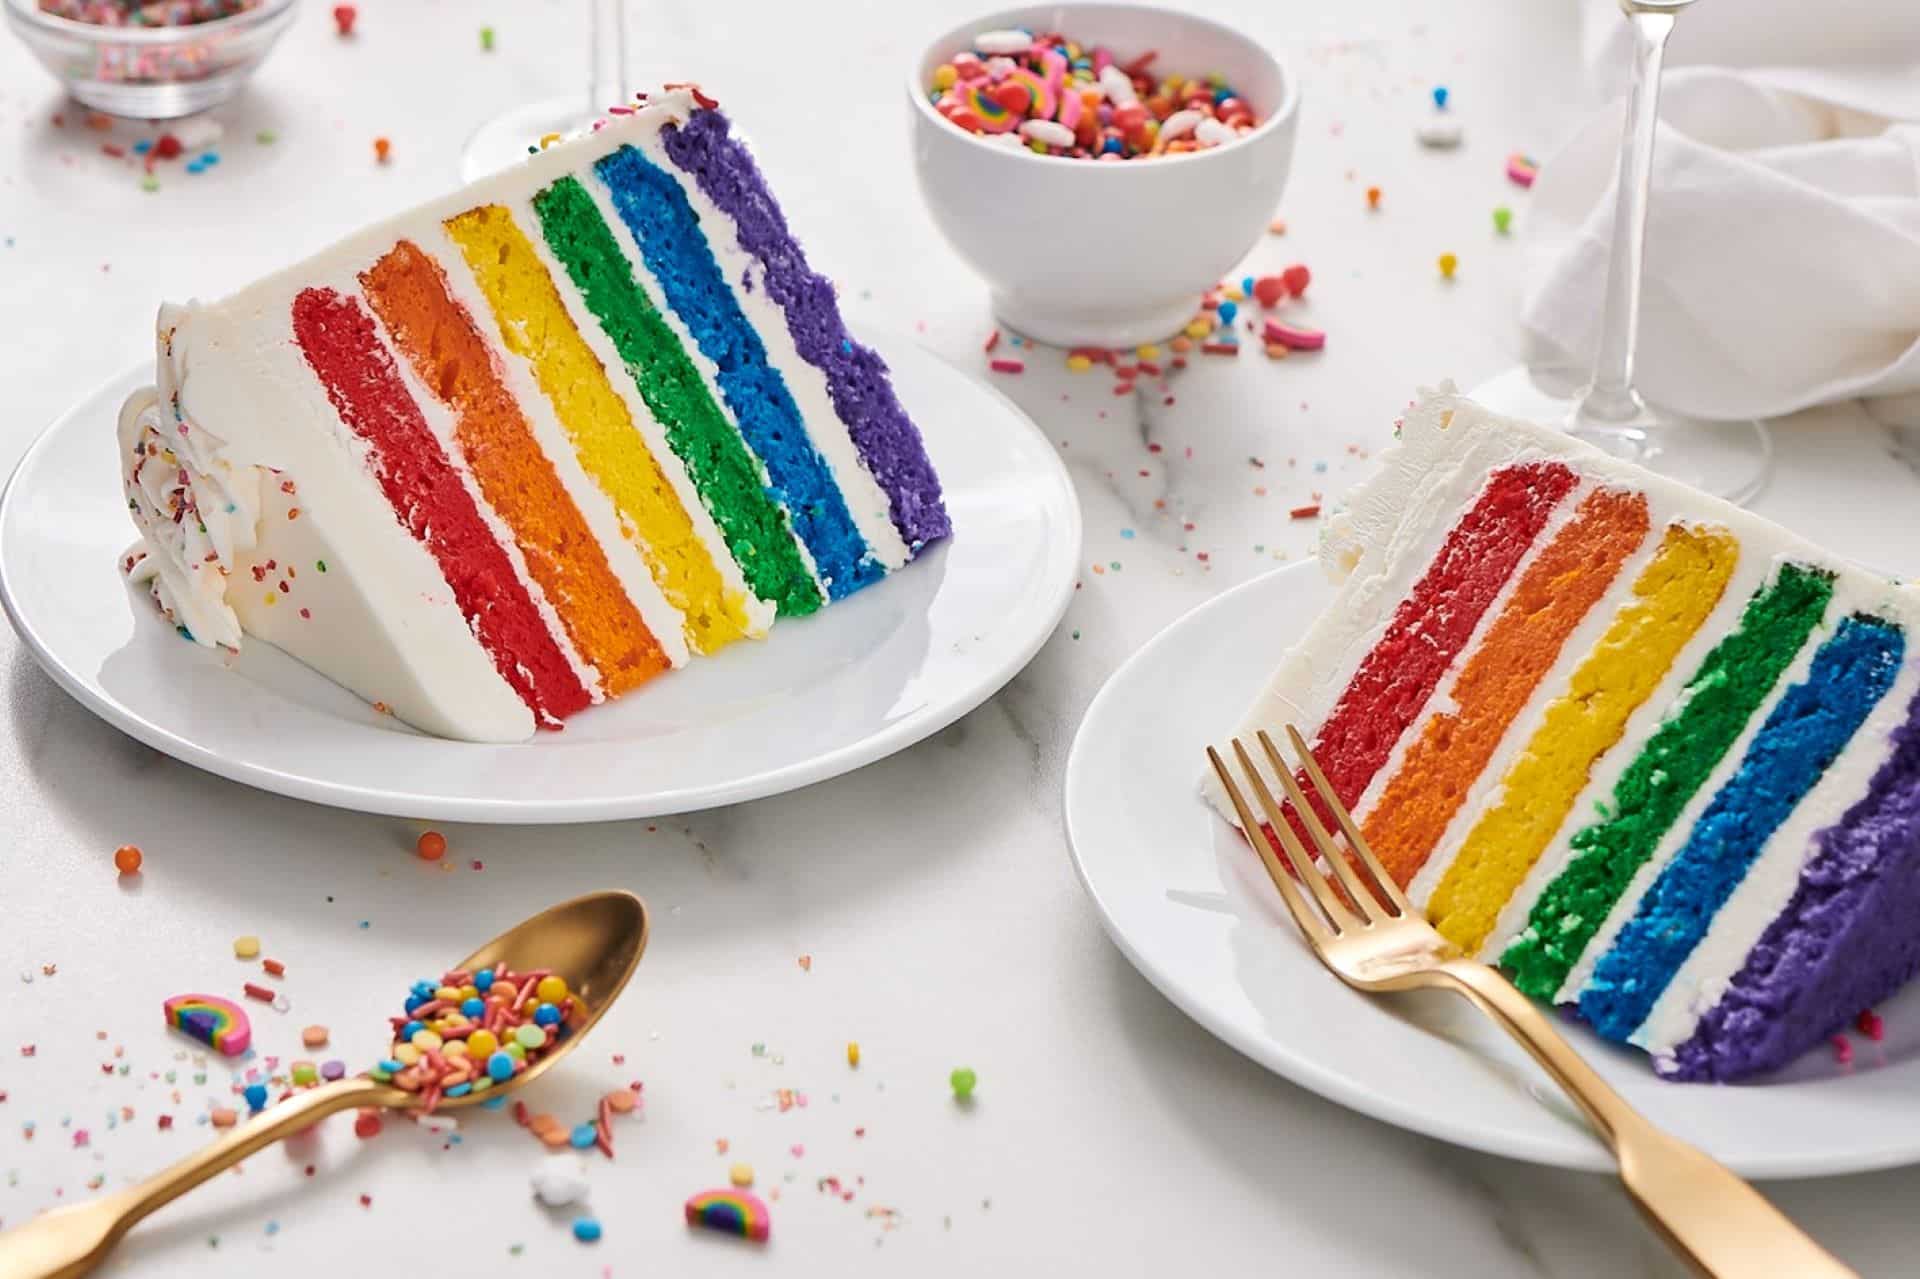 These 7 Bright and Colorful Desserts Prove That Love Is The Best Ingredient